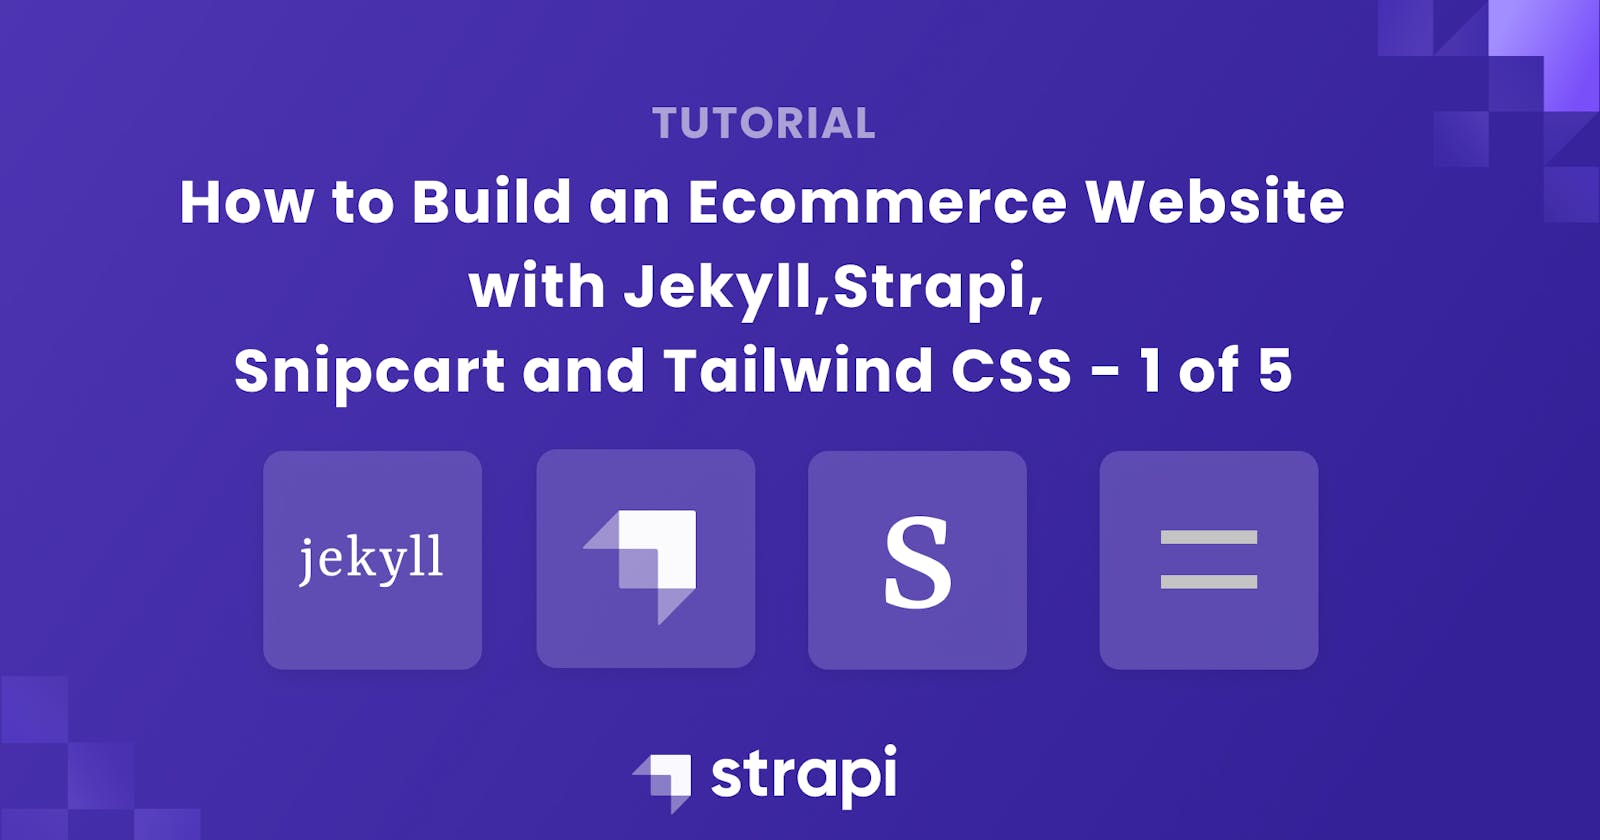 Building an Ecommerce Website with Jekyll, Strapi, Snipcart and Tailwind CSS [1 of 5]